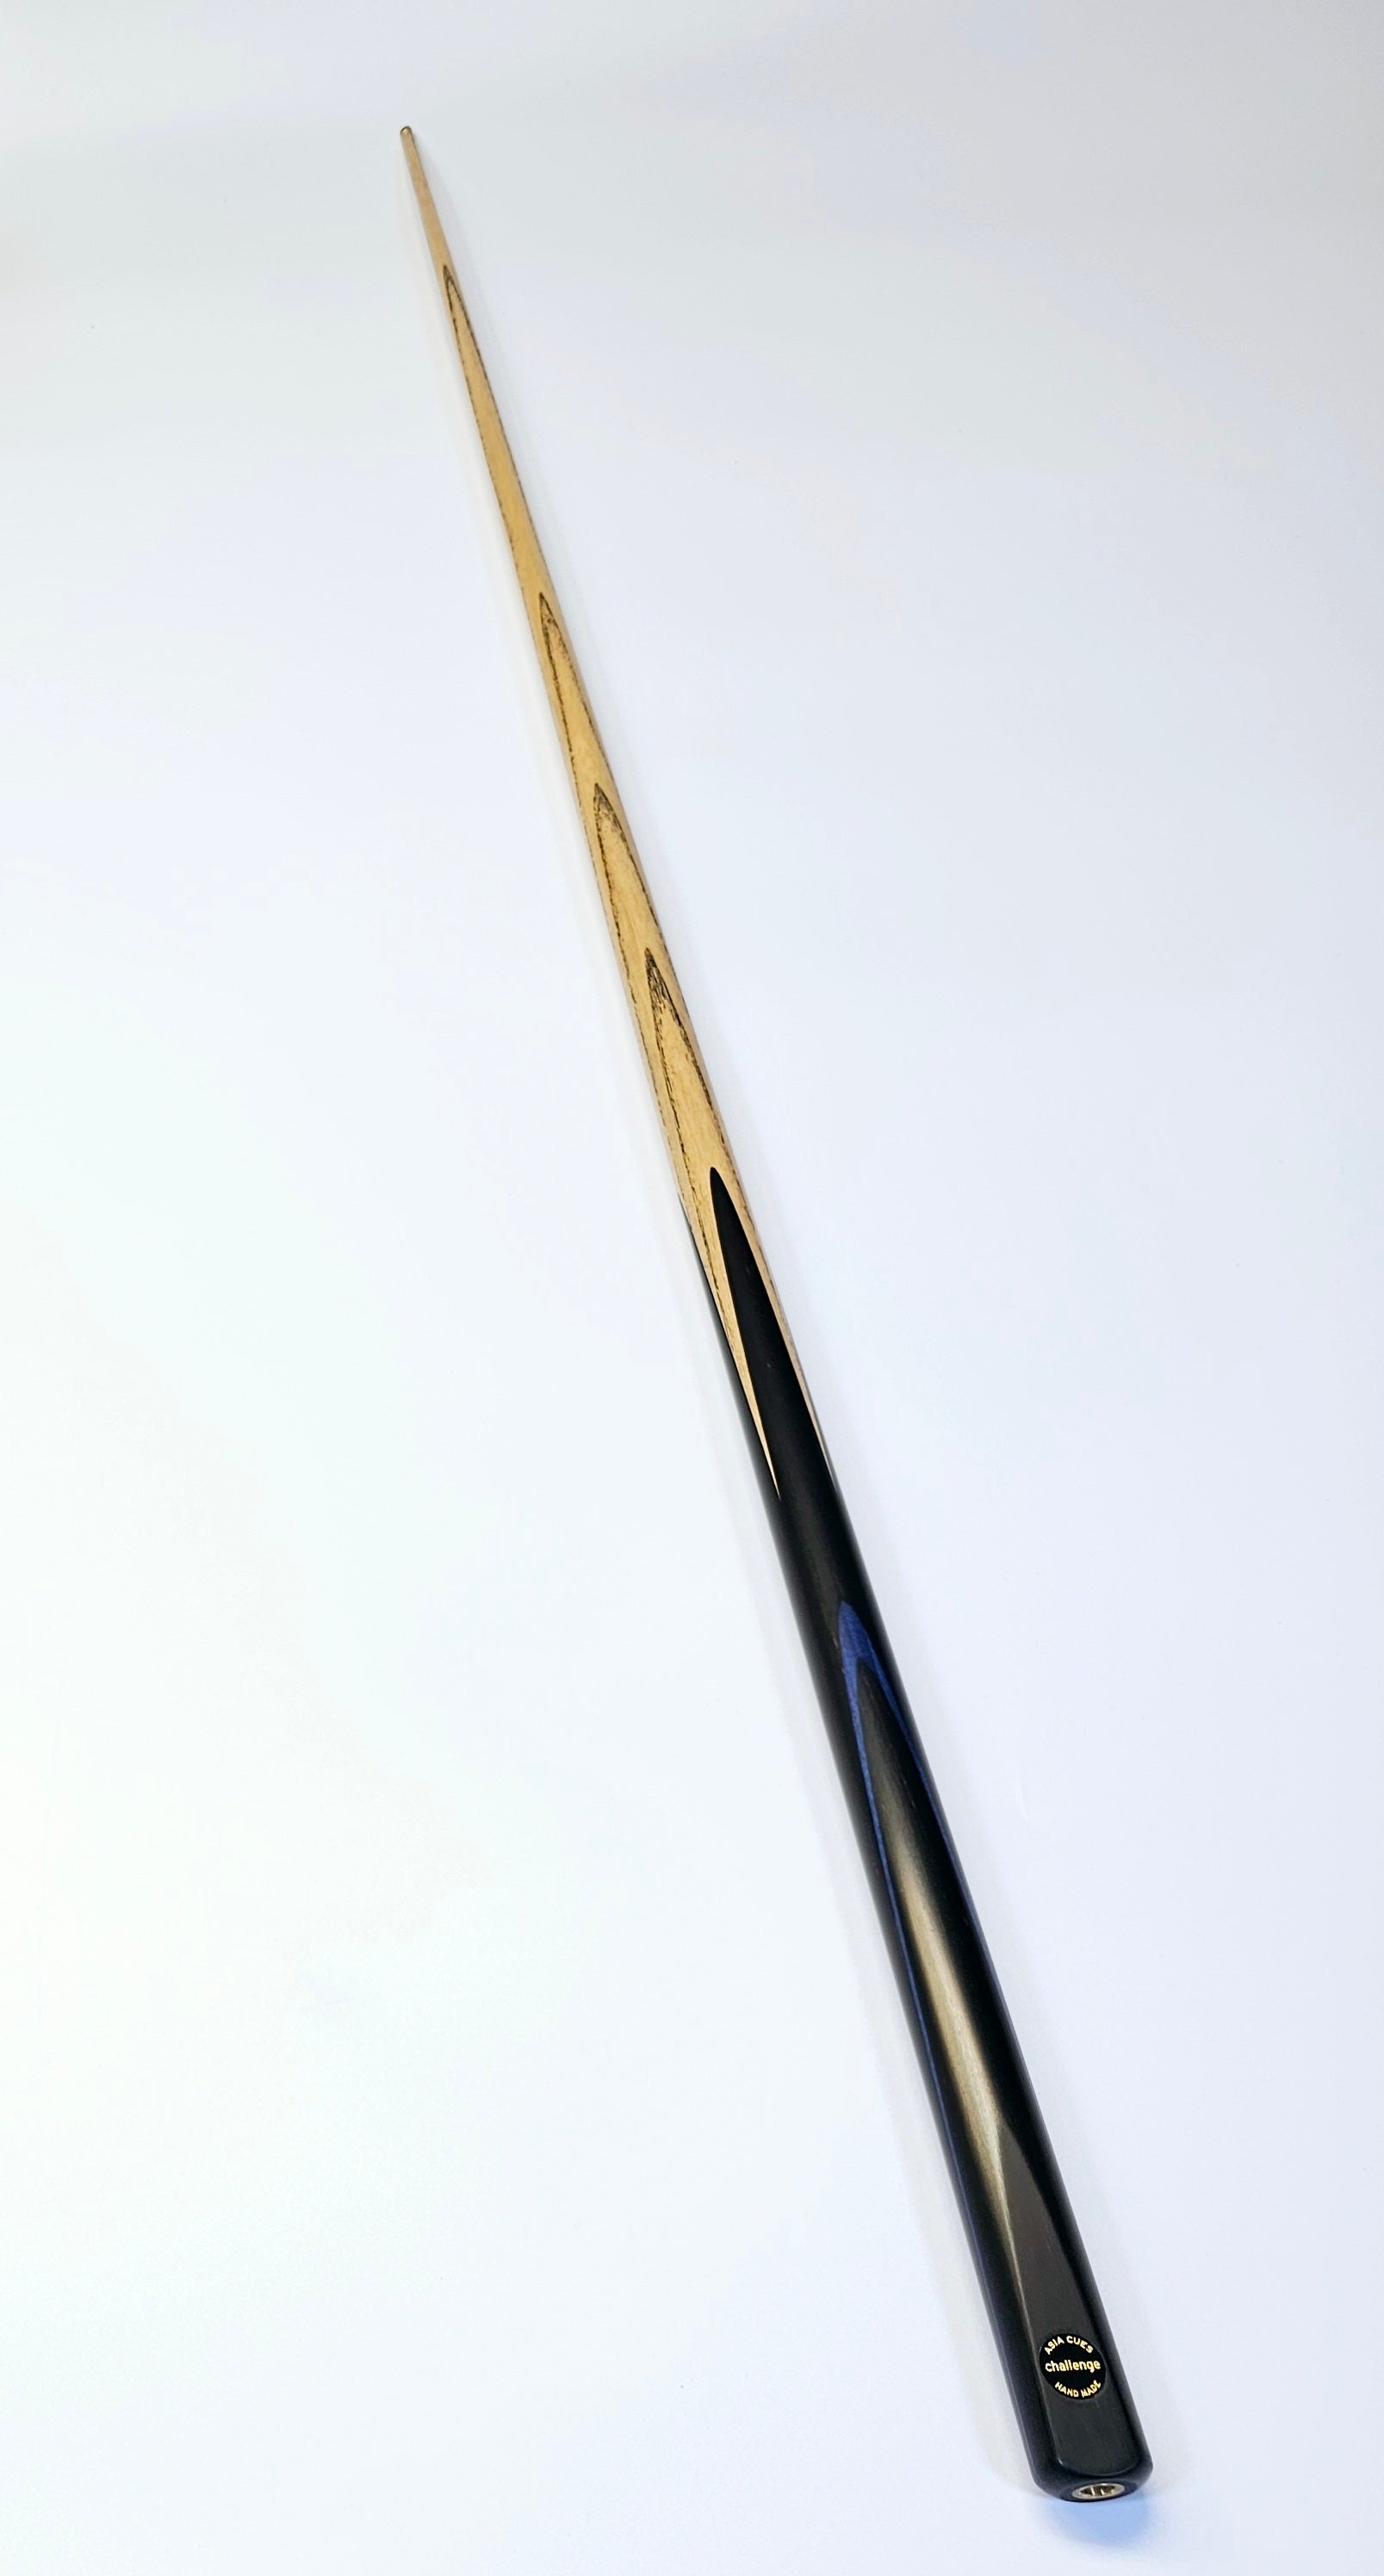 Asia Cues Challenge - One Piece Pool Cue 8.7mm Tip, 17.2oz, 58"